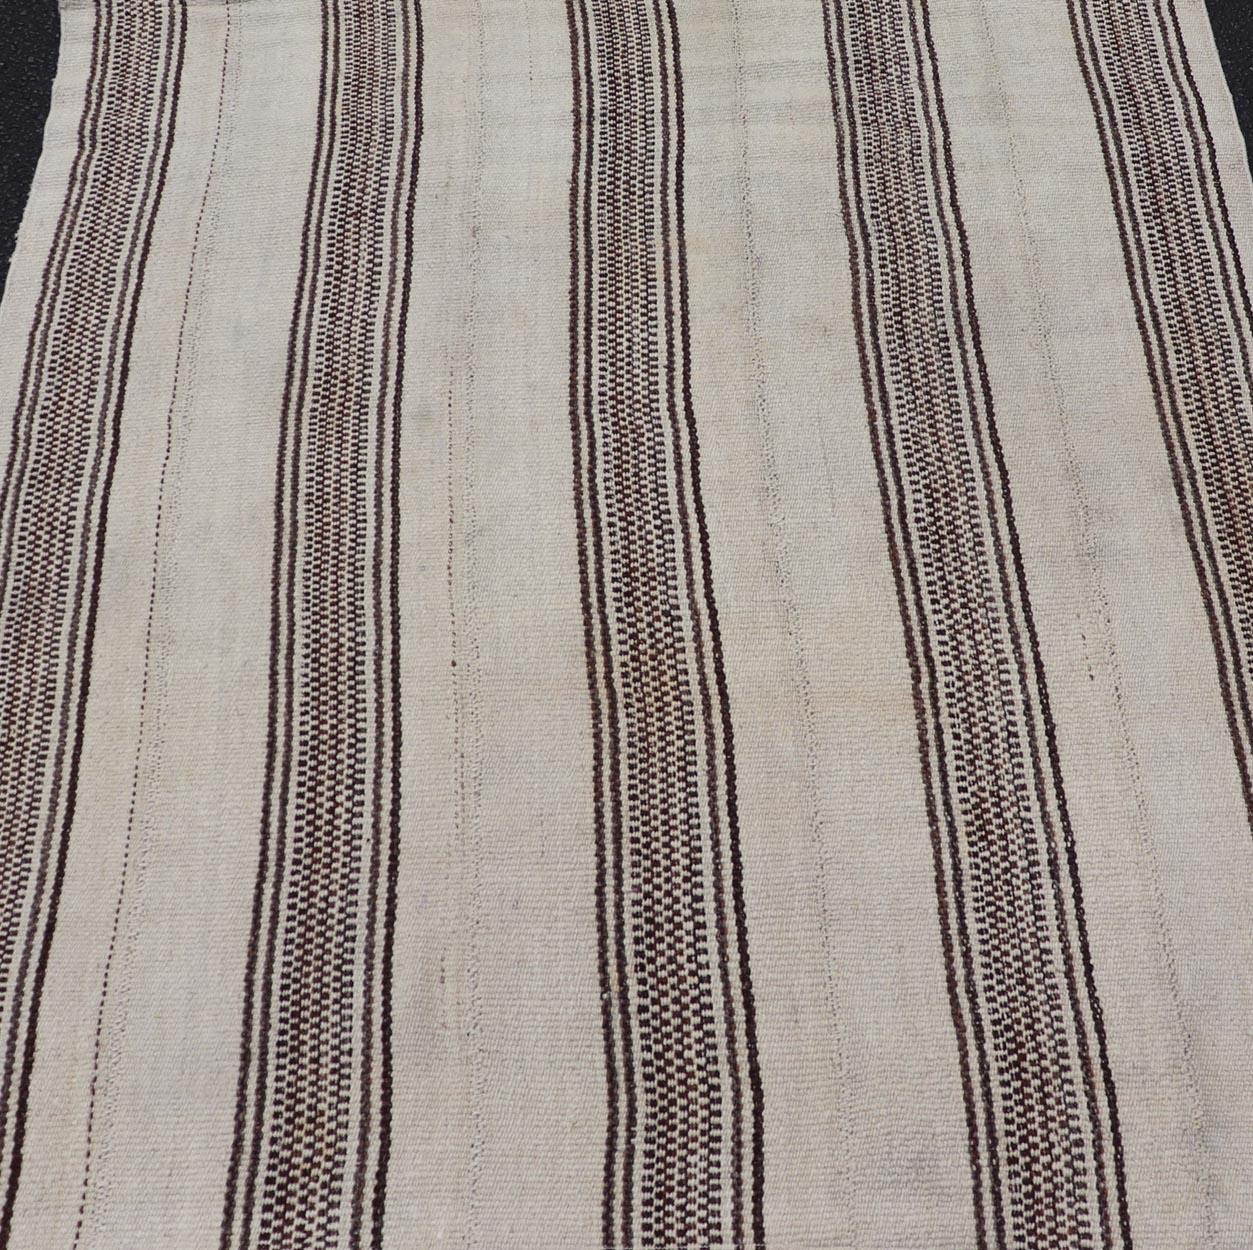 Stripe Design Turkish Vintage Flat-Weave Rug in Brown and Ivory. Keivan Woven Arts / rug EN-178786, country of origin / type: Turkey / Kilim, circa 1950
Measures: 4'5 x 5'1 
Woven during the early-20th century in Turkey, this Kilim is decorated with